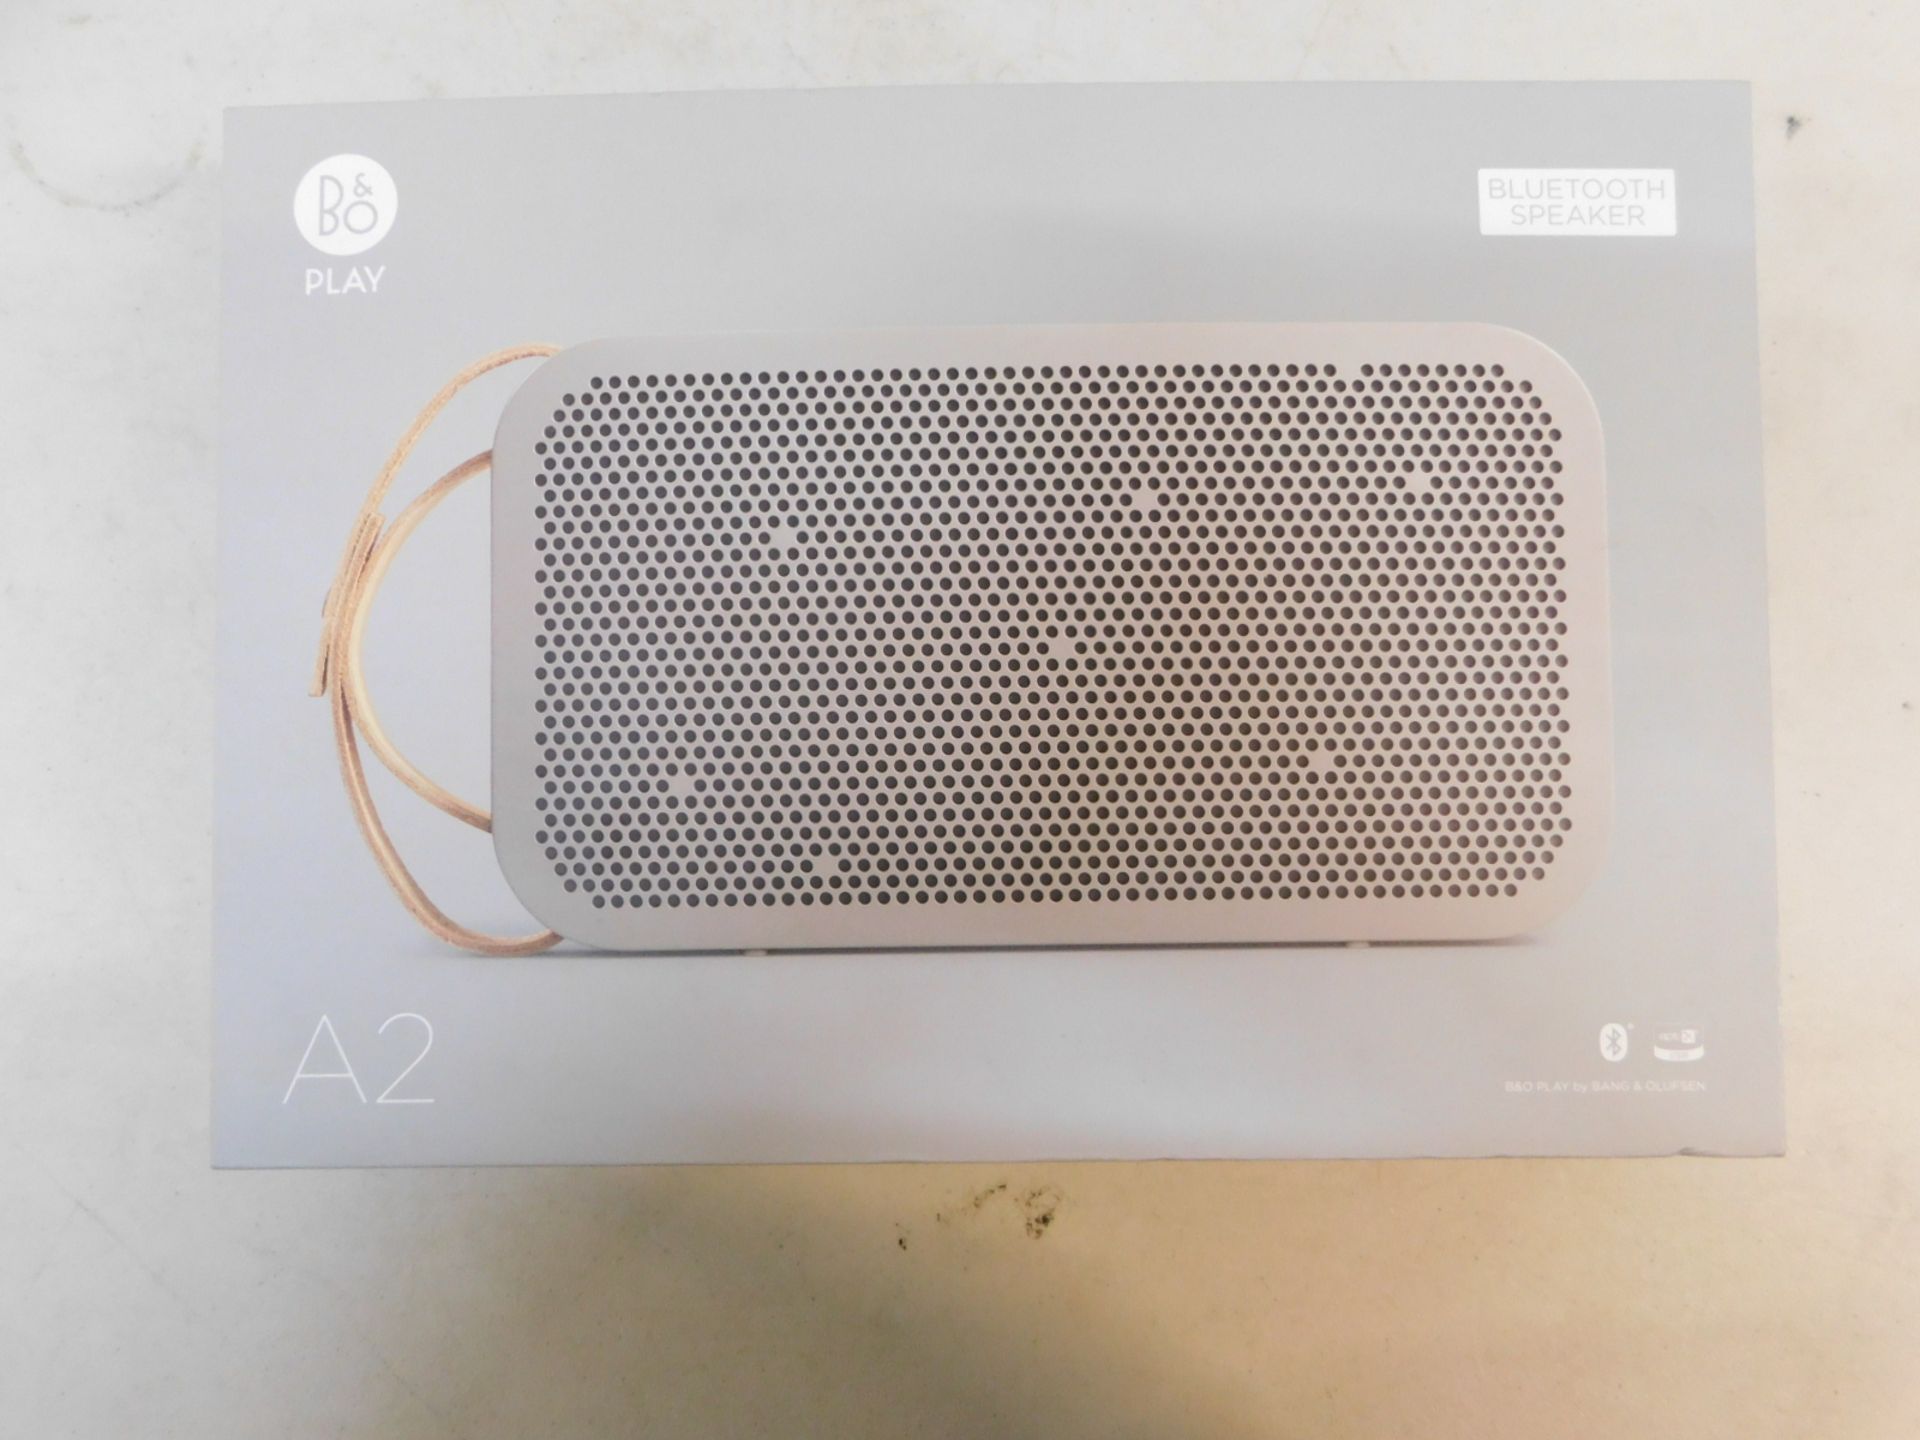 1 BOXED BANG AND OLUFSEN BEOPLAY A2 BLUETOOTH SPEAKER WITH CHARGER RRP Â£299